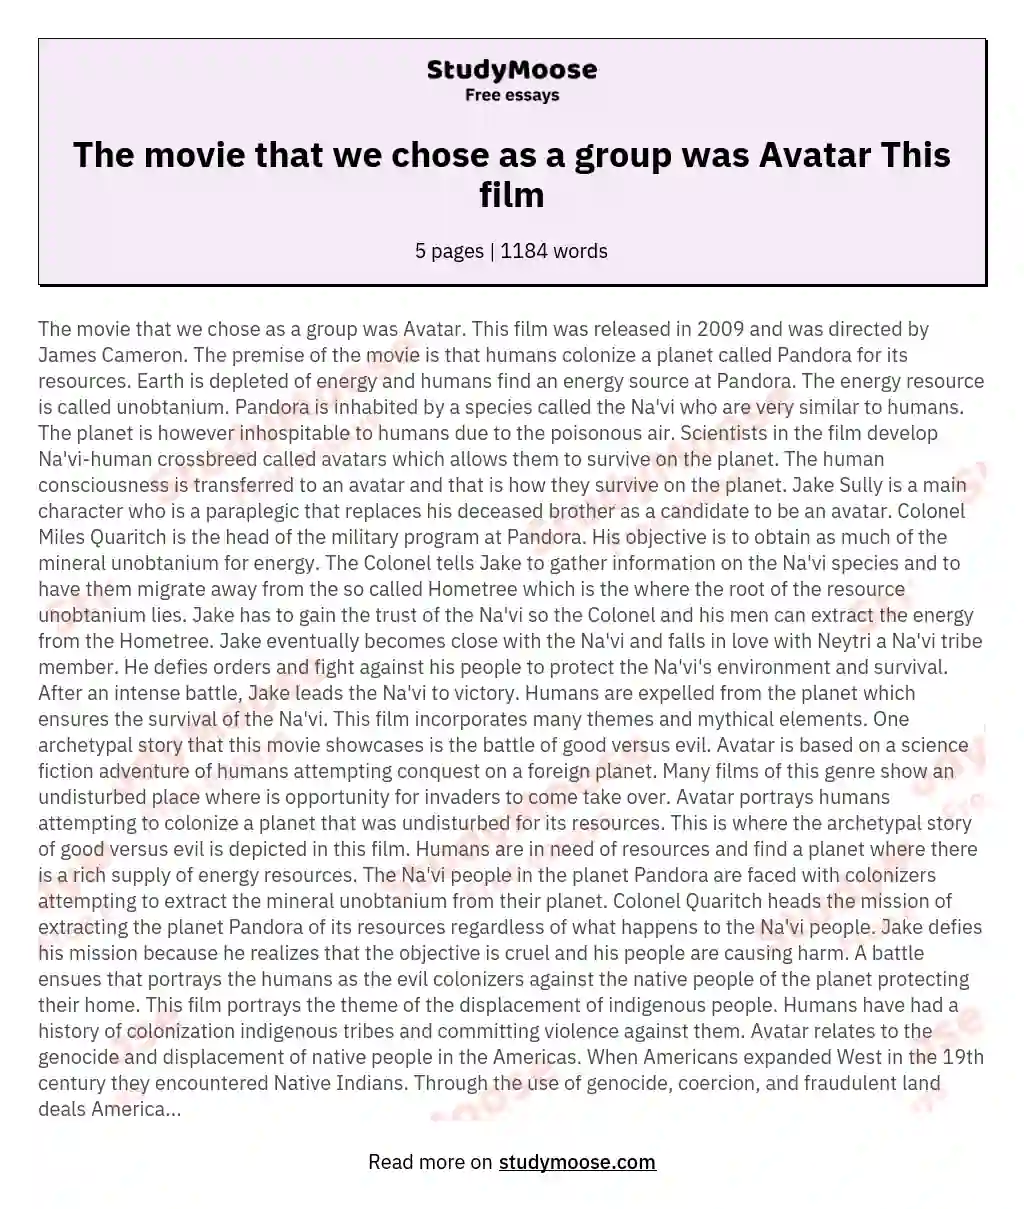 The movie that we chose as a group was Avatar This film essay